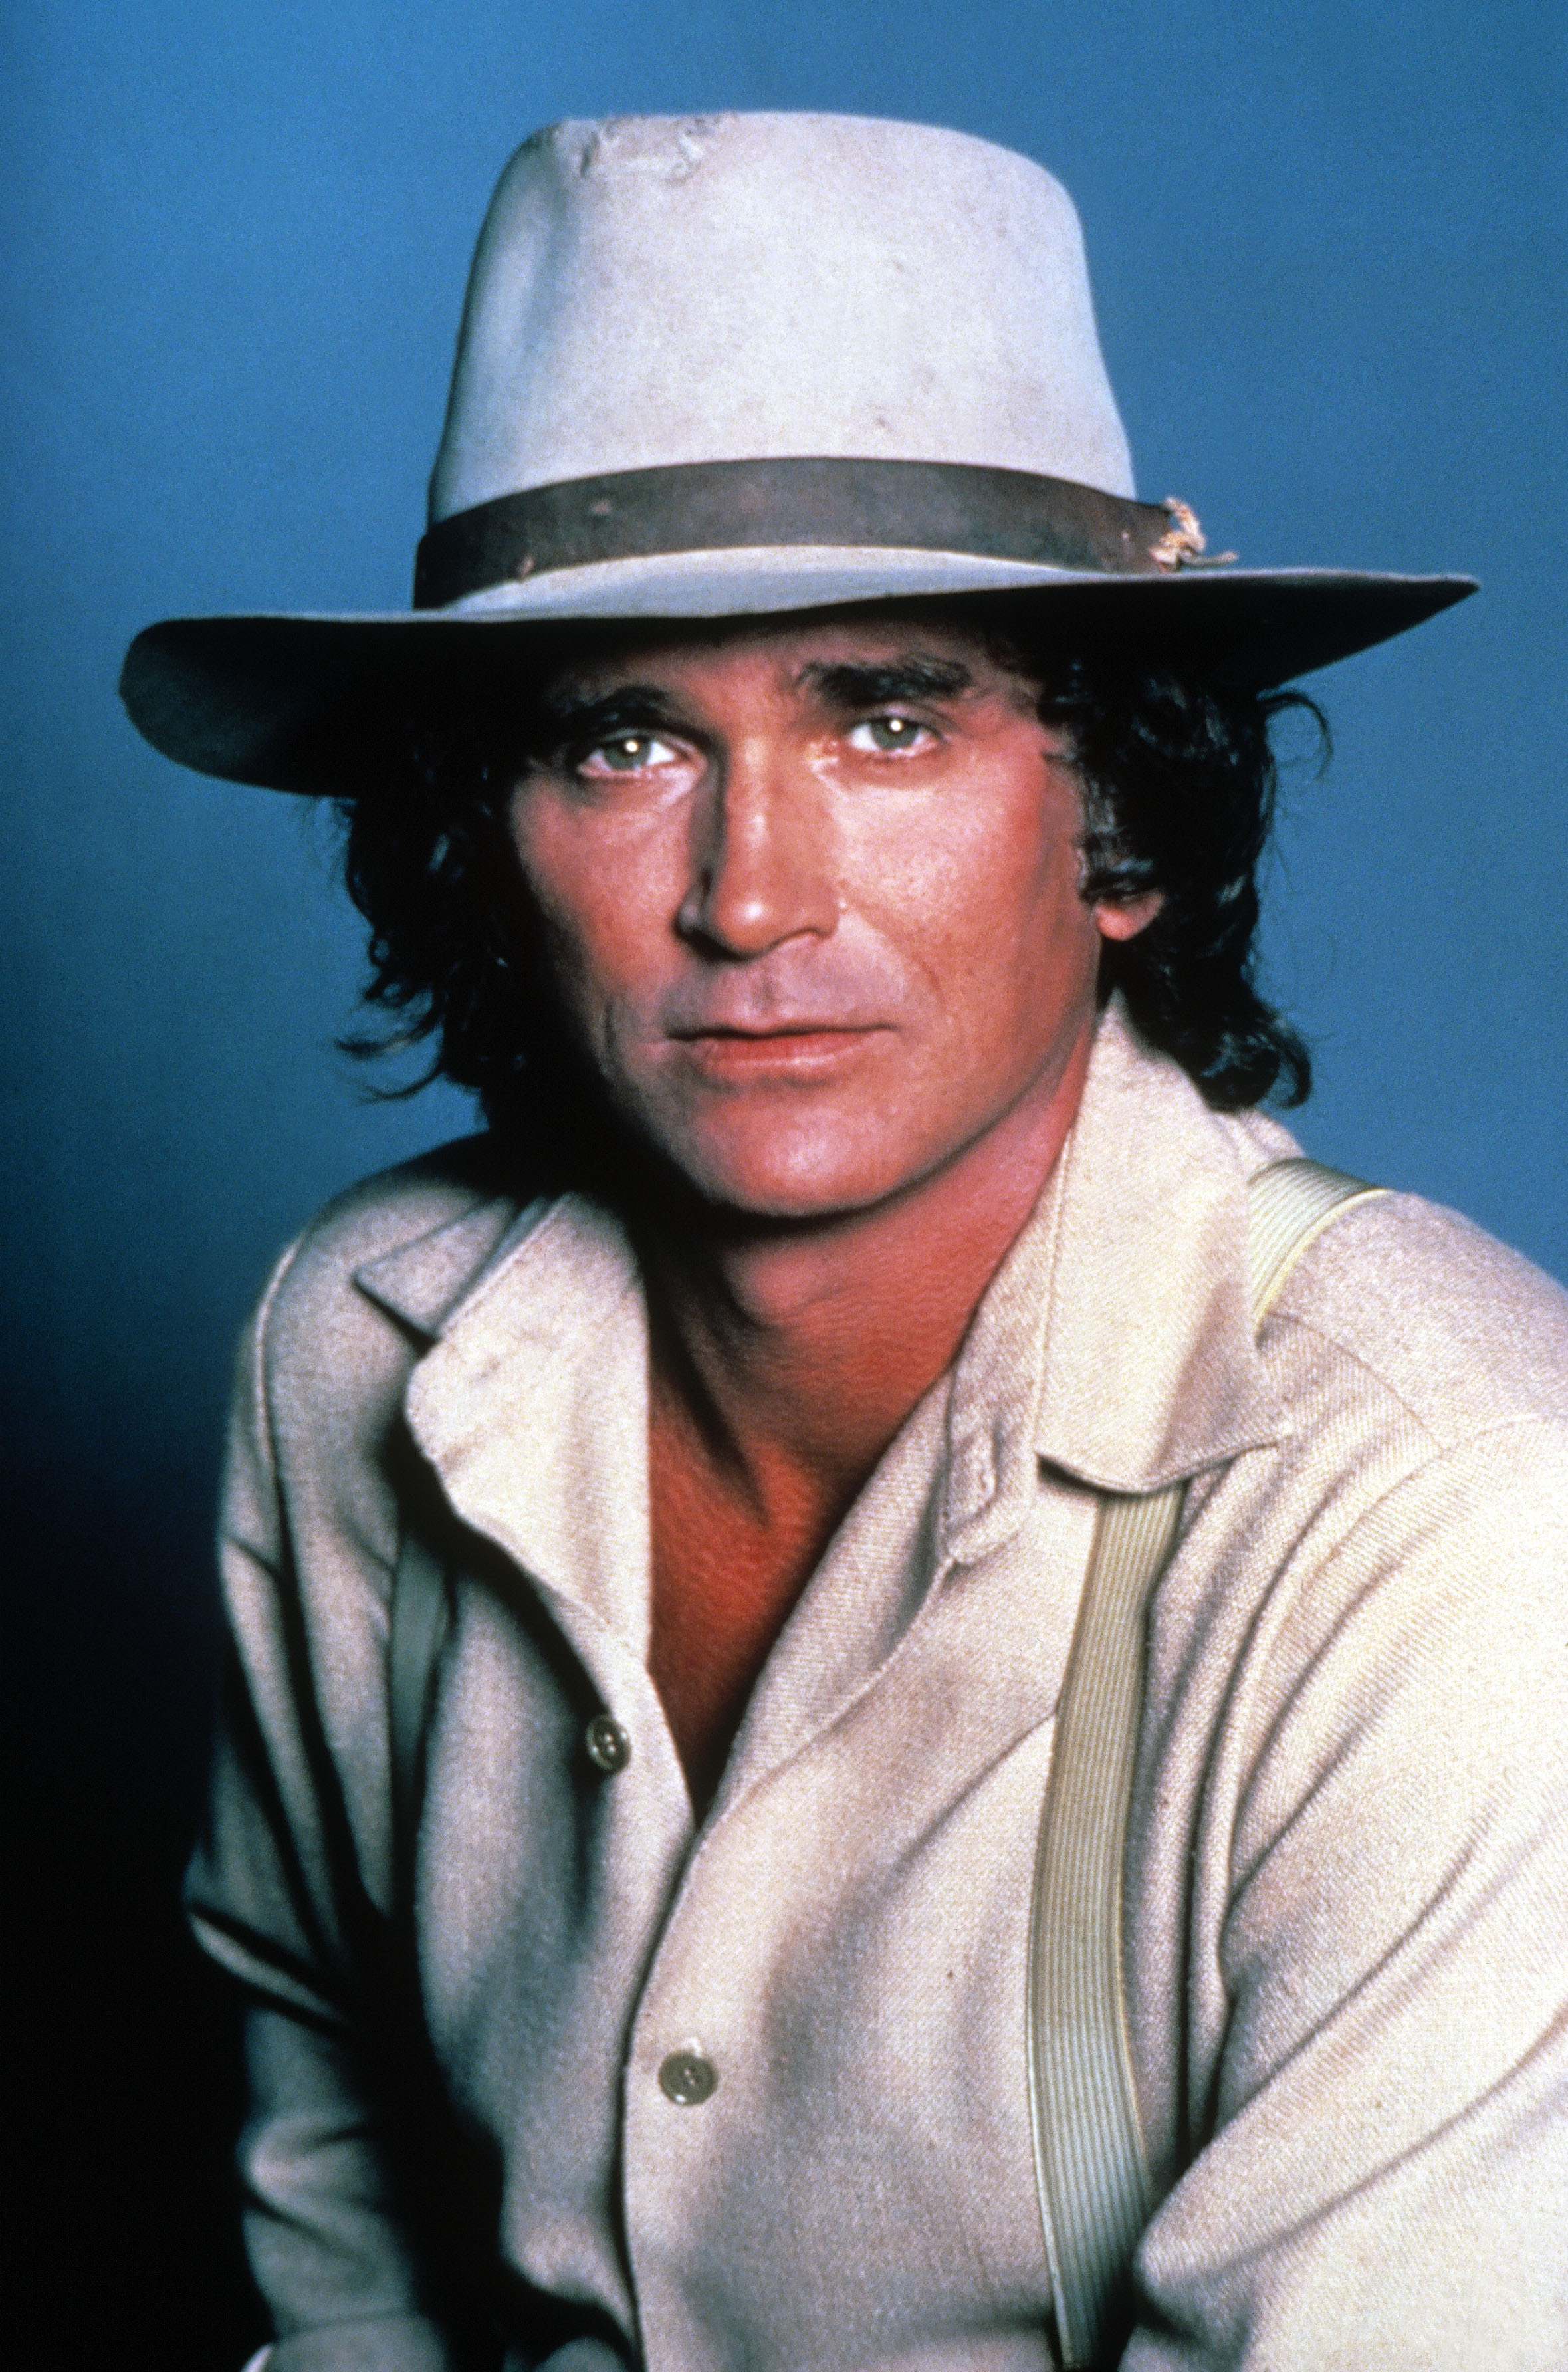 Pictures of Michael Landon - Pictures Of Celebrities